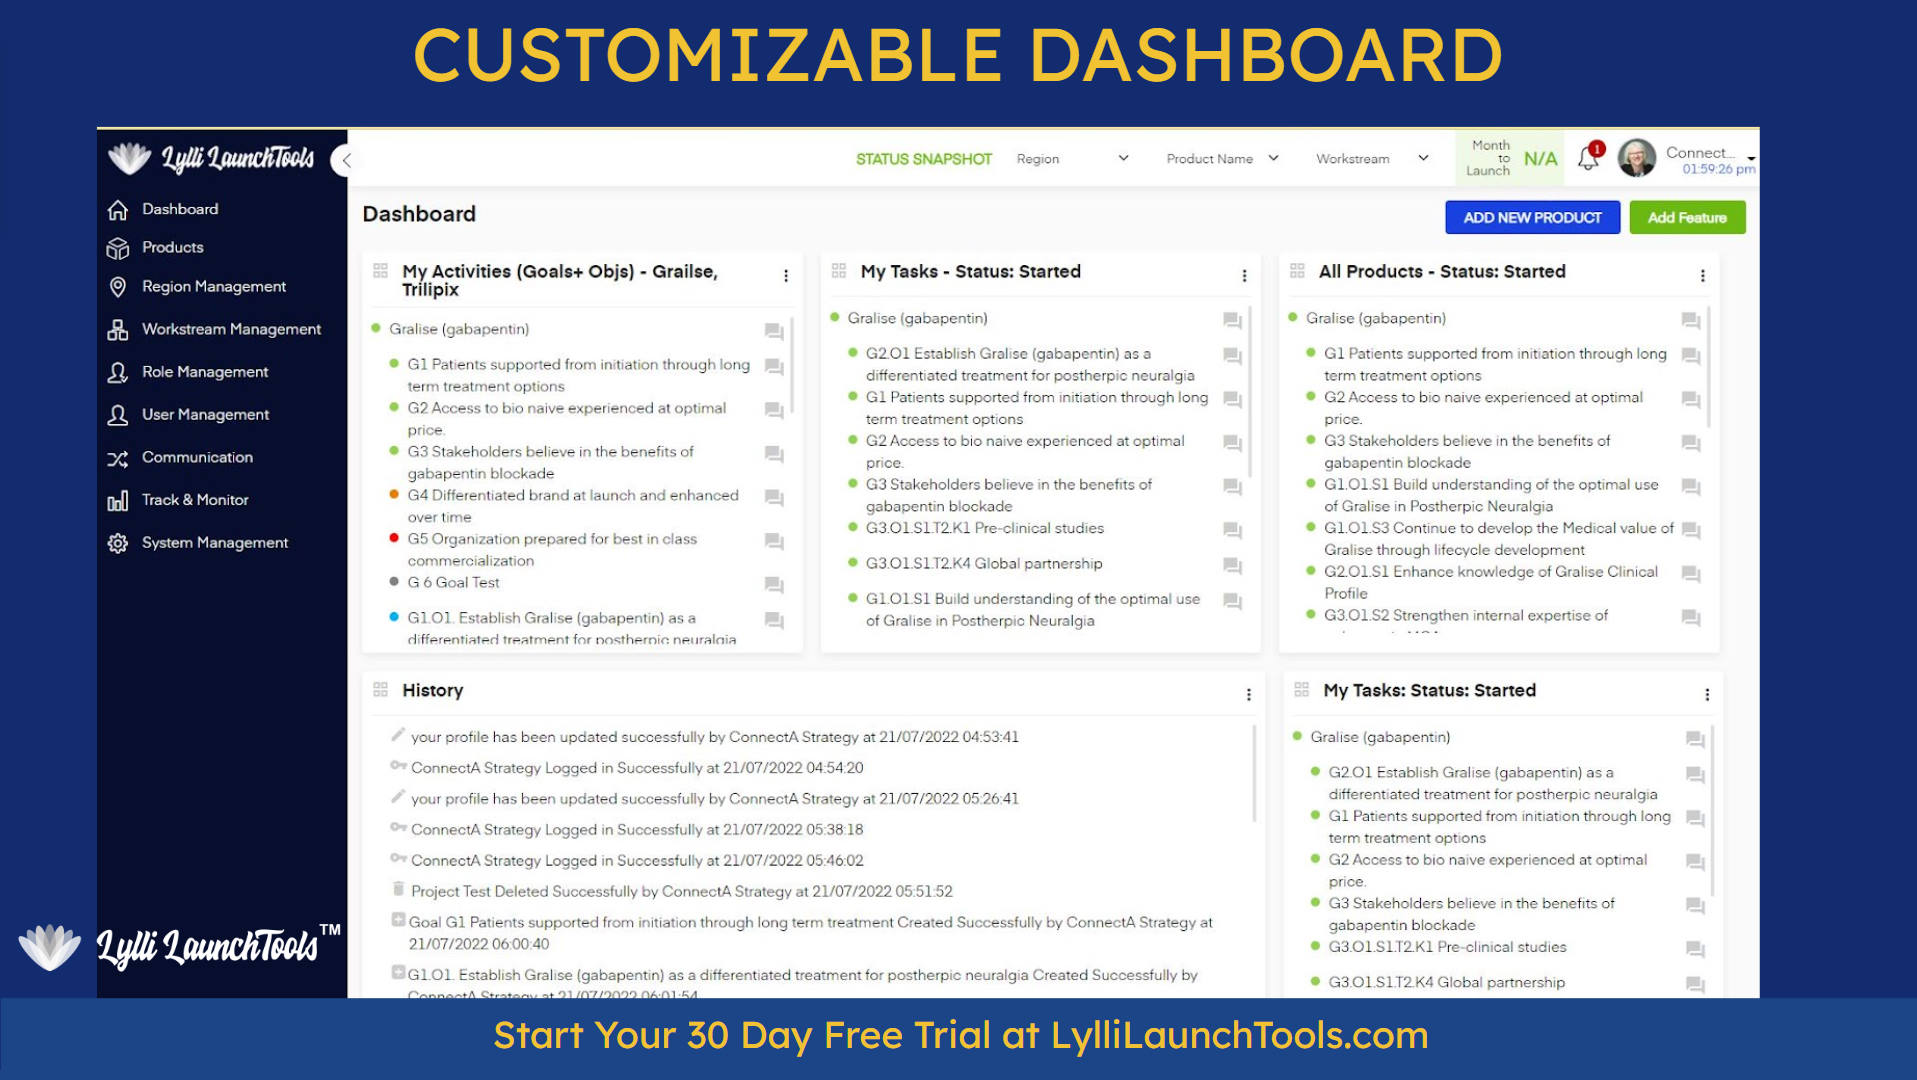 Lylli LaunchTools Custom Dashboard keeps your Product Launch on Track. Team members now know what to do and when to do it, reducing the need for follow-ups. Launch Better, Faster & Smoother. Start for free today at LylliLaunchTools.com/signup